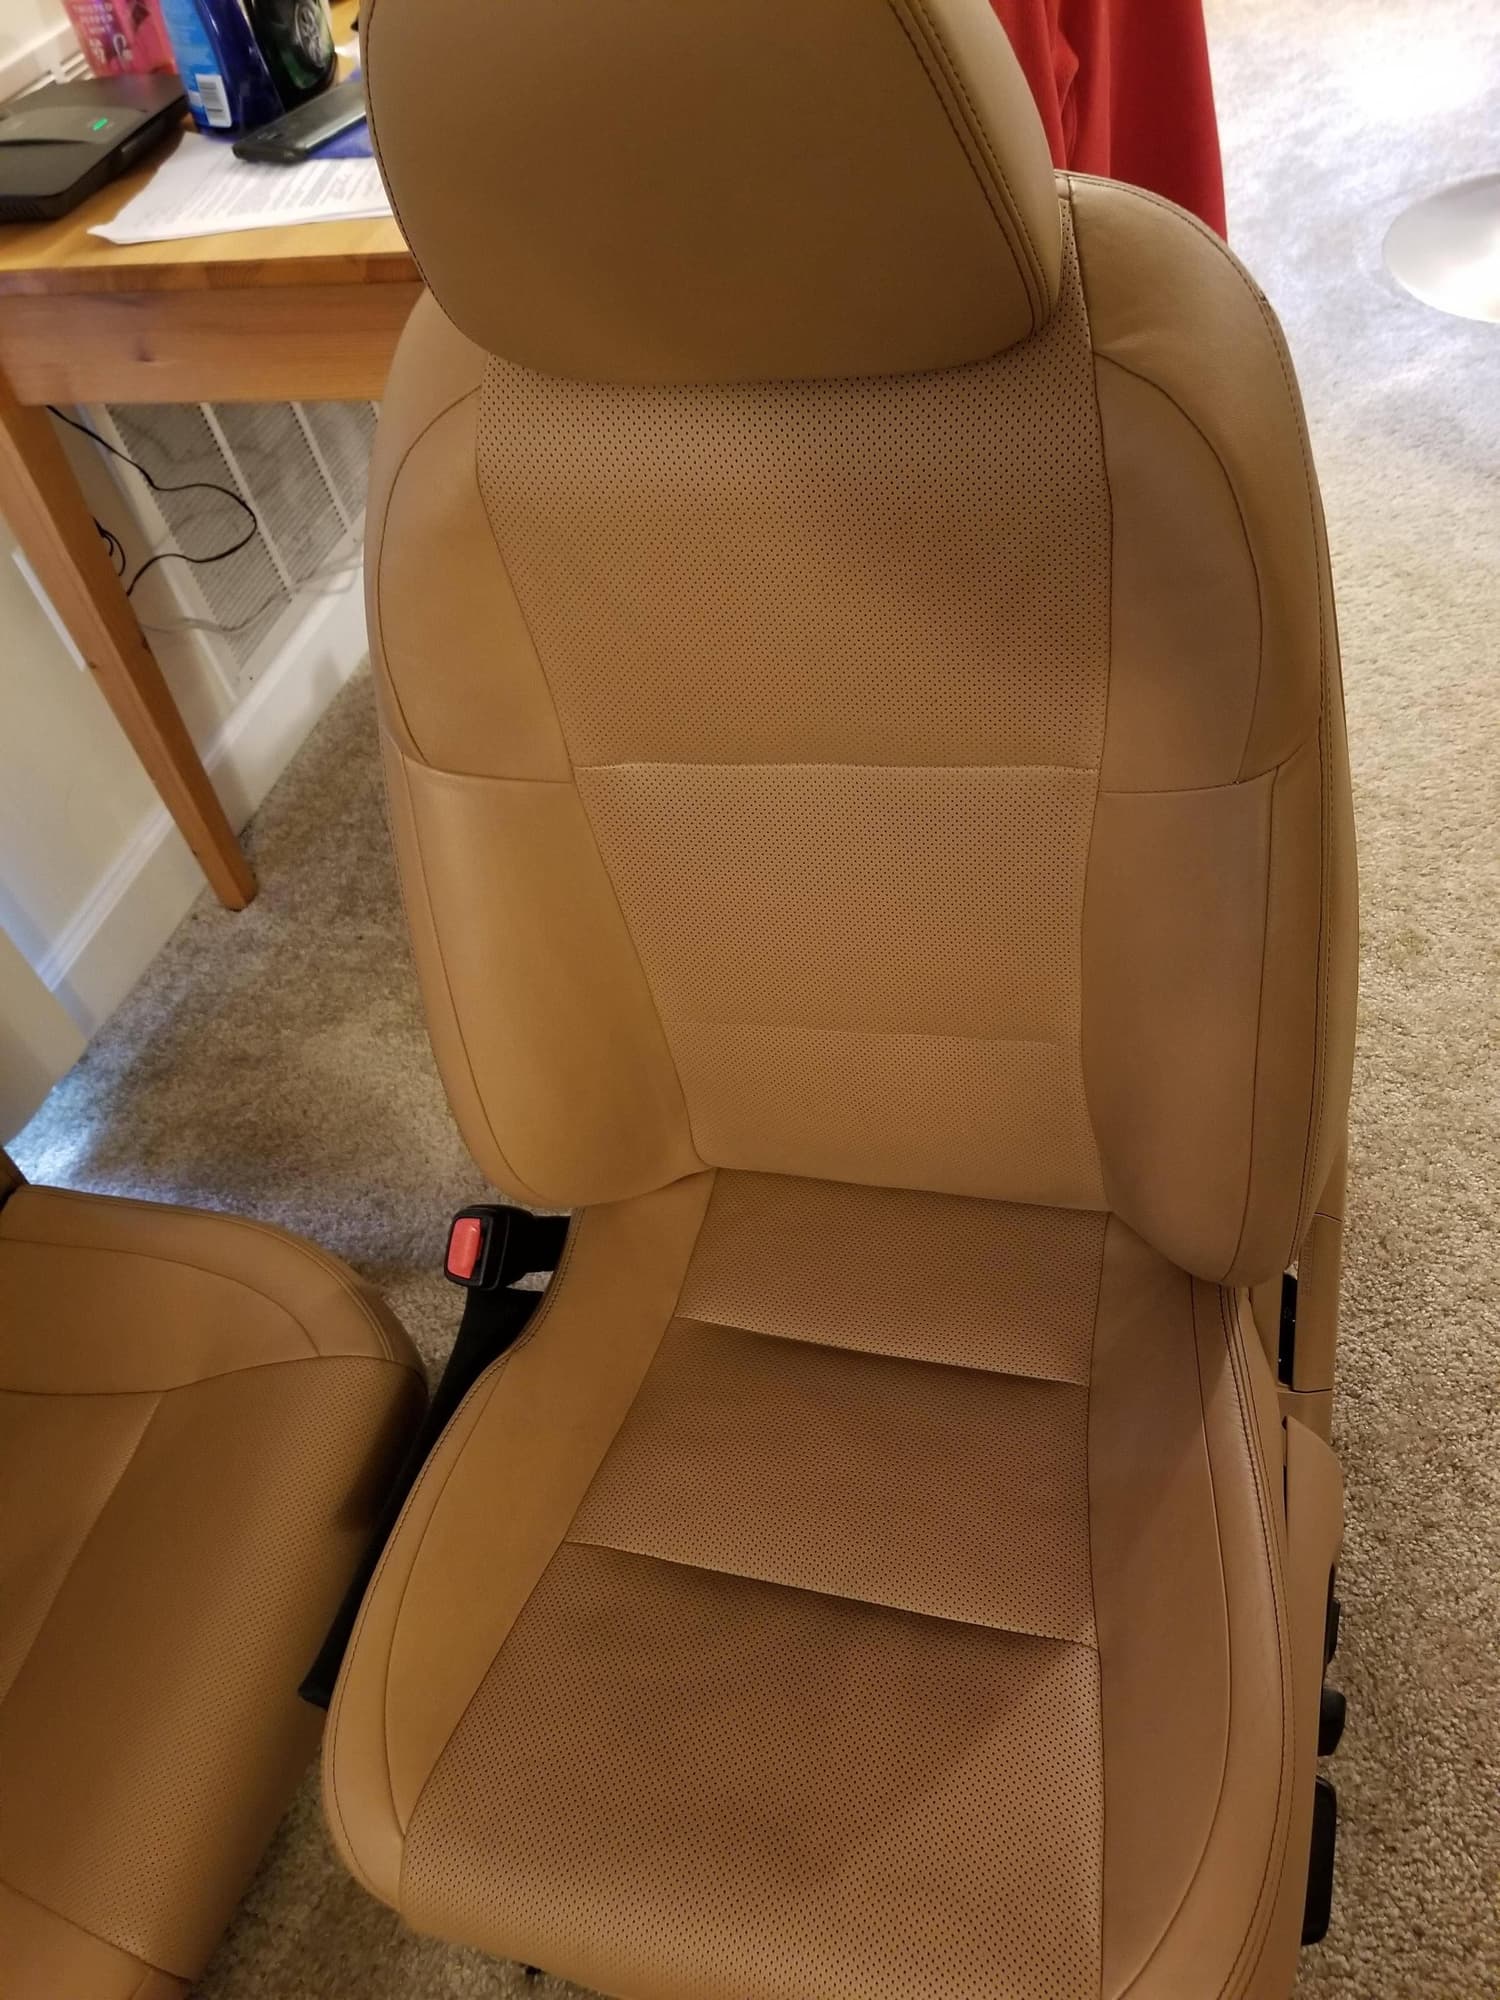 Interior/Upholstery - 2013-2019 Lexus GS Complete Front and Rear Seats Flaxen - Used - 2013 to 2019 Lexus GS350 - 2013 to 2019 Lexus GS450h - Falls Church, VA 22043, United States